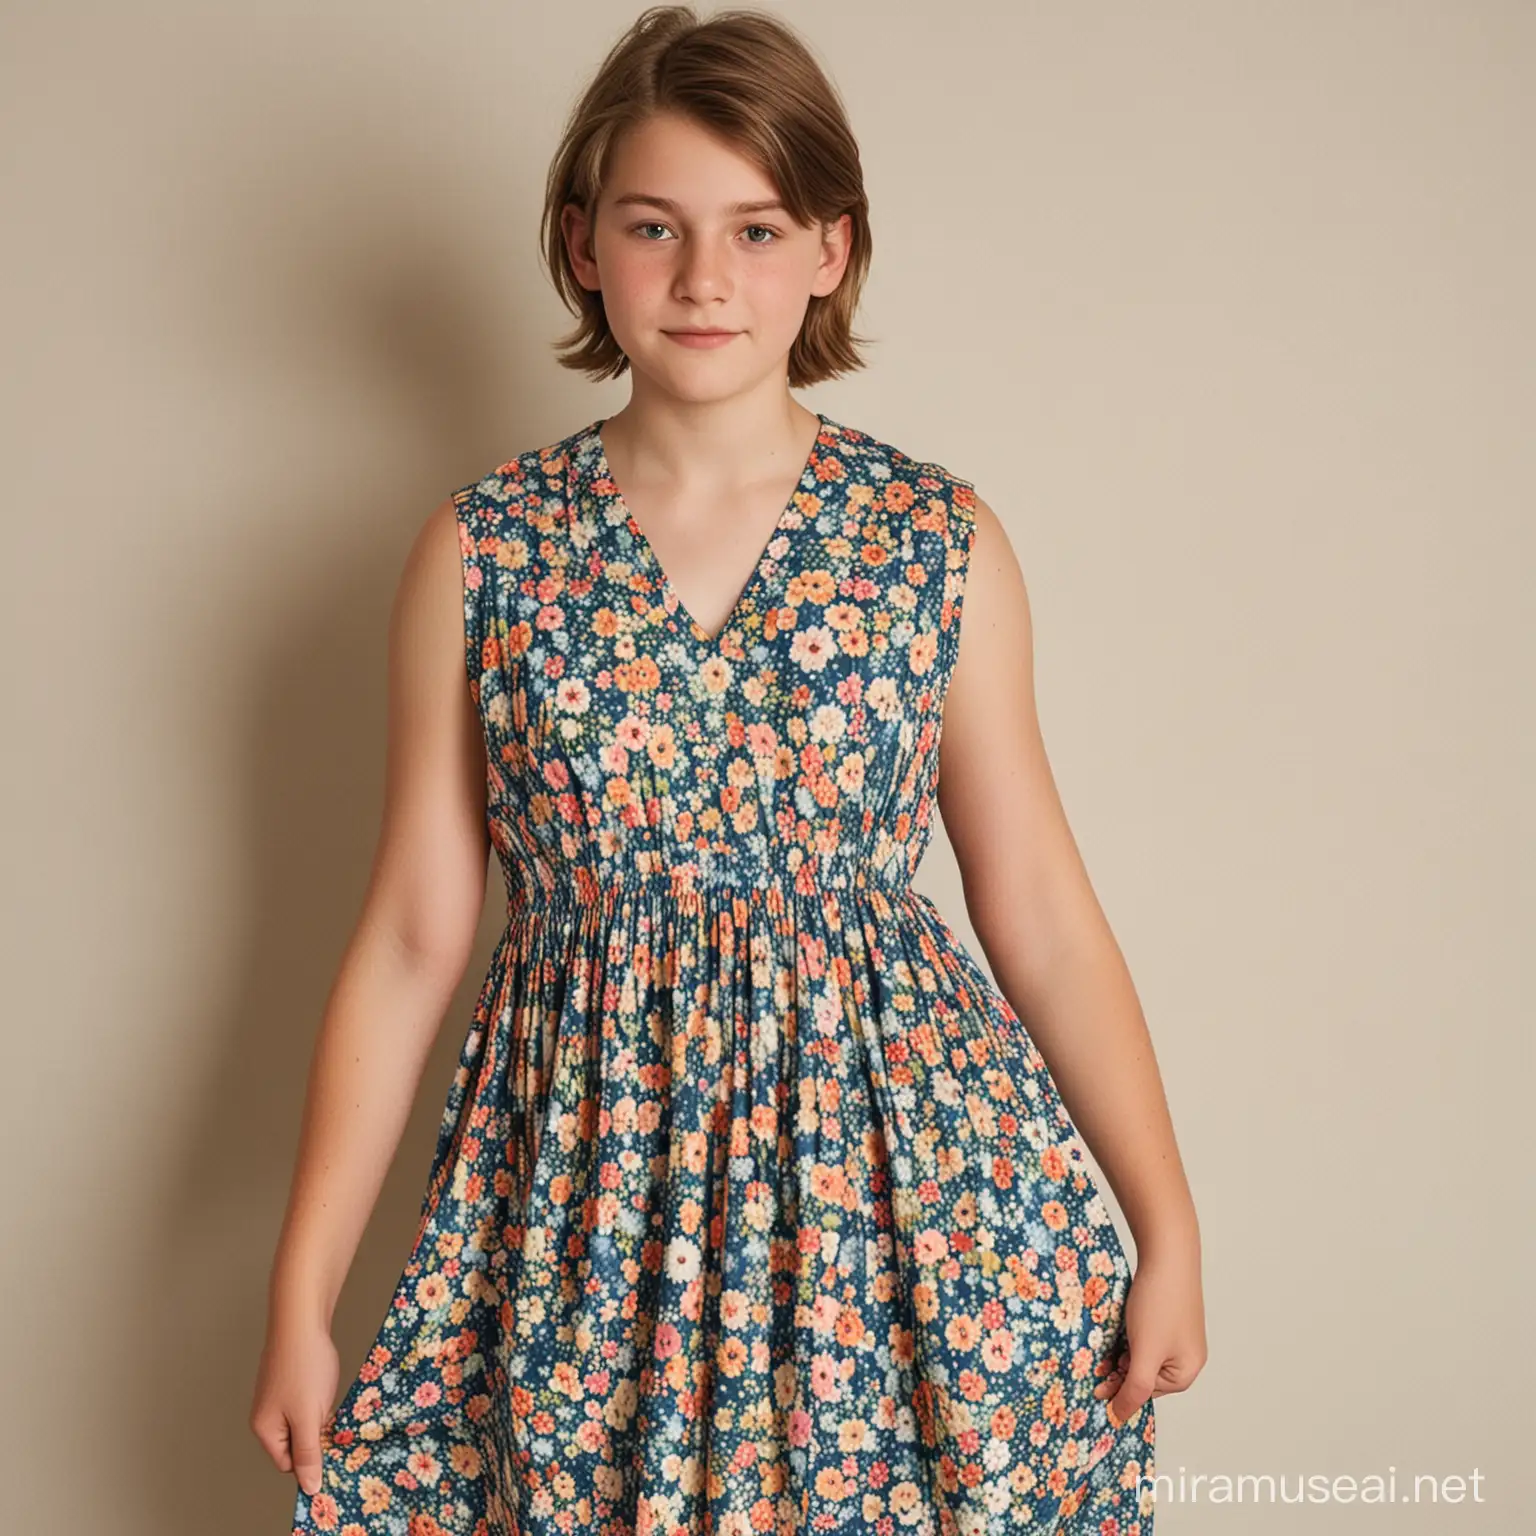 Teen Boy in Floral Summer Dress Due to Outgrown Clothes